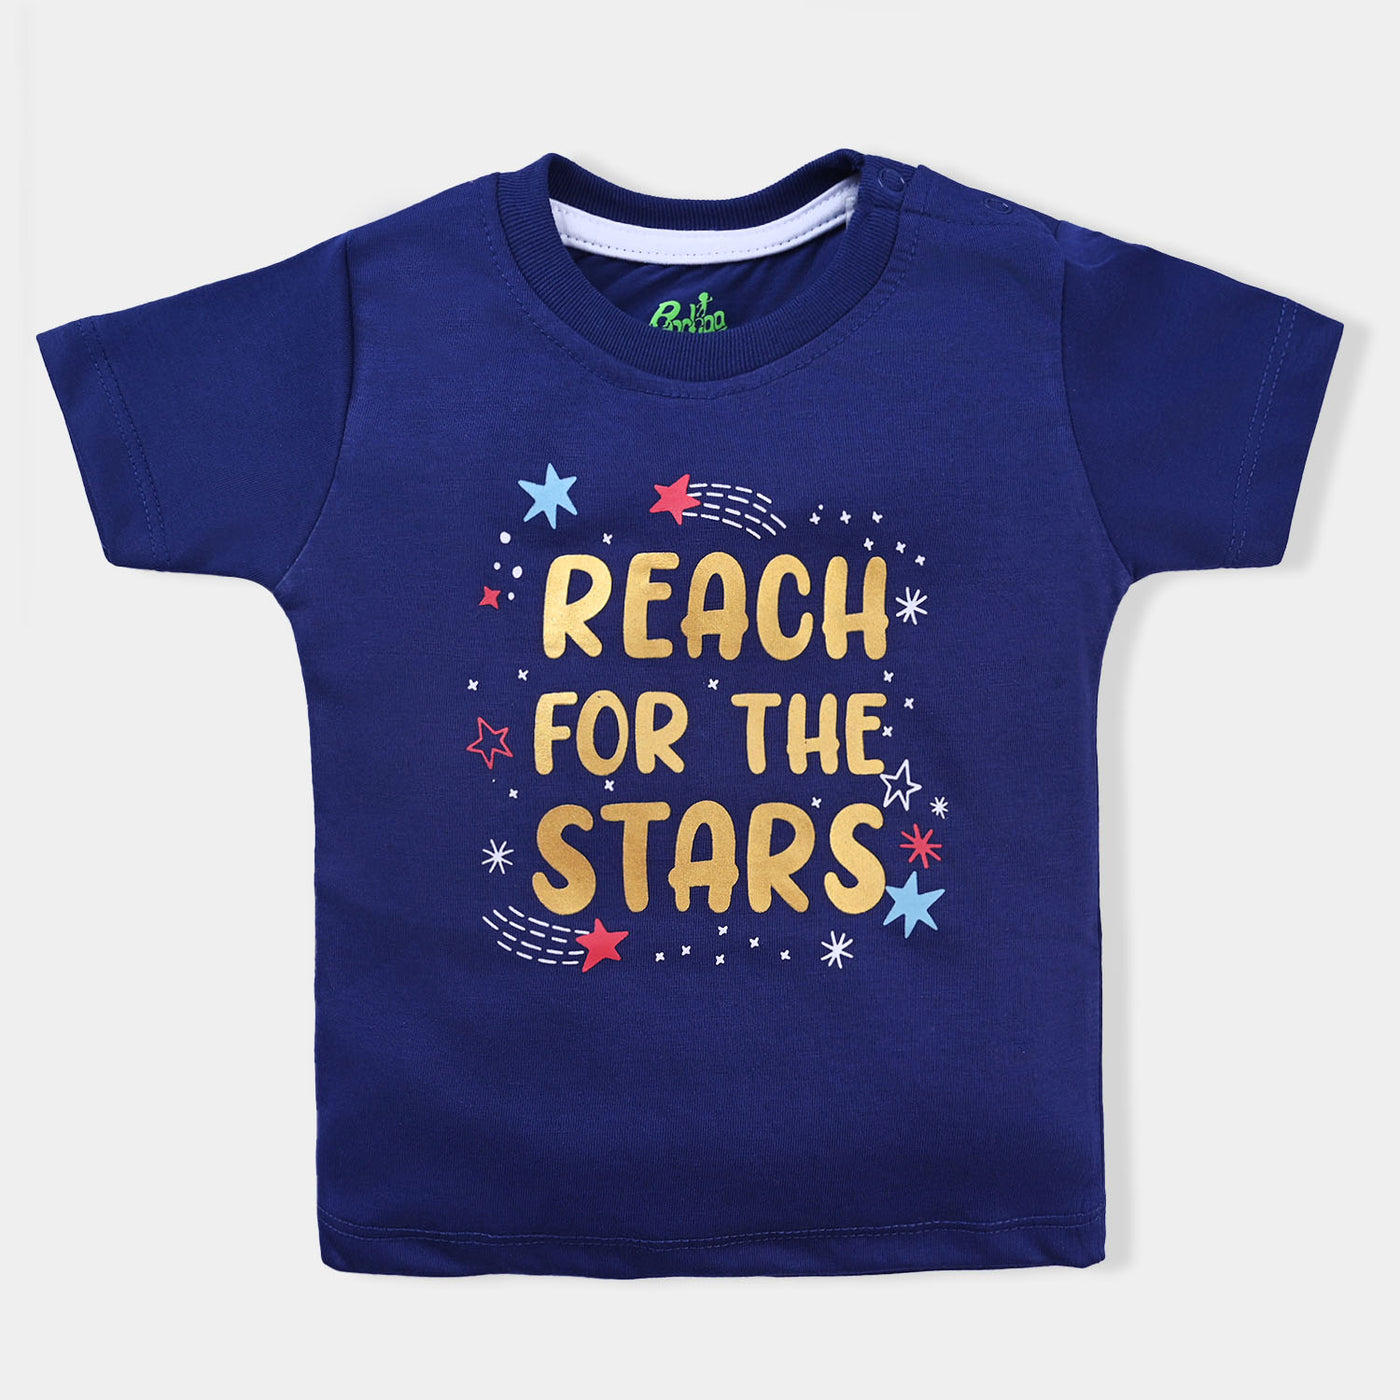 Infant Boys Cotton Jersey Knitted Night Suit Reach Stars | Navy Blue